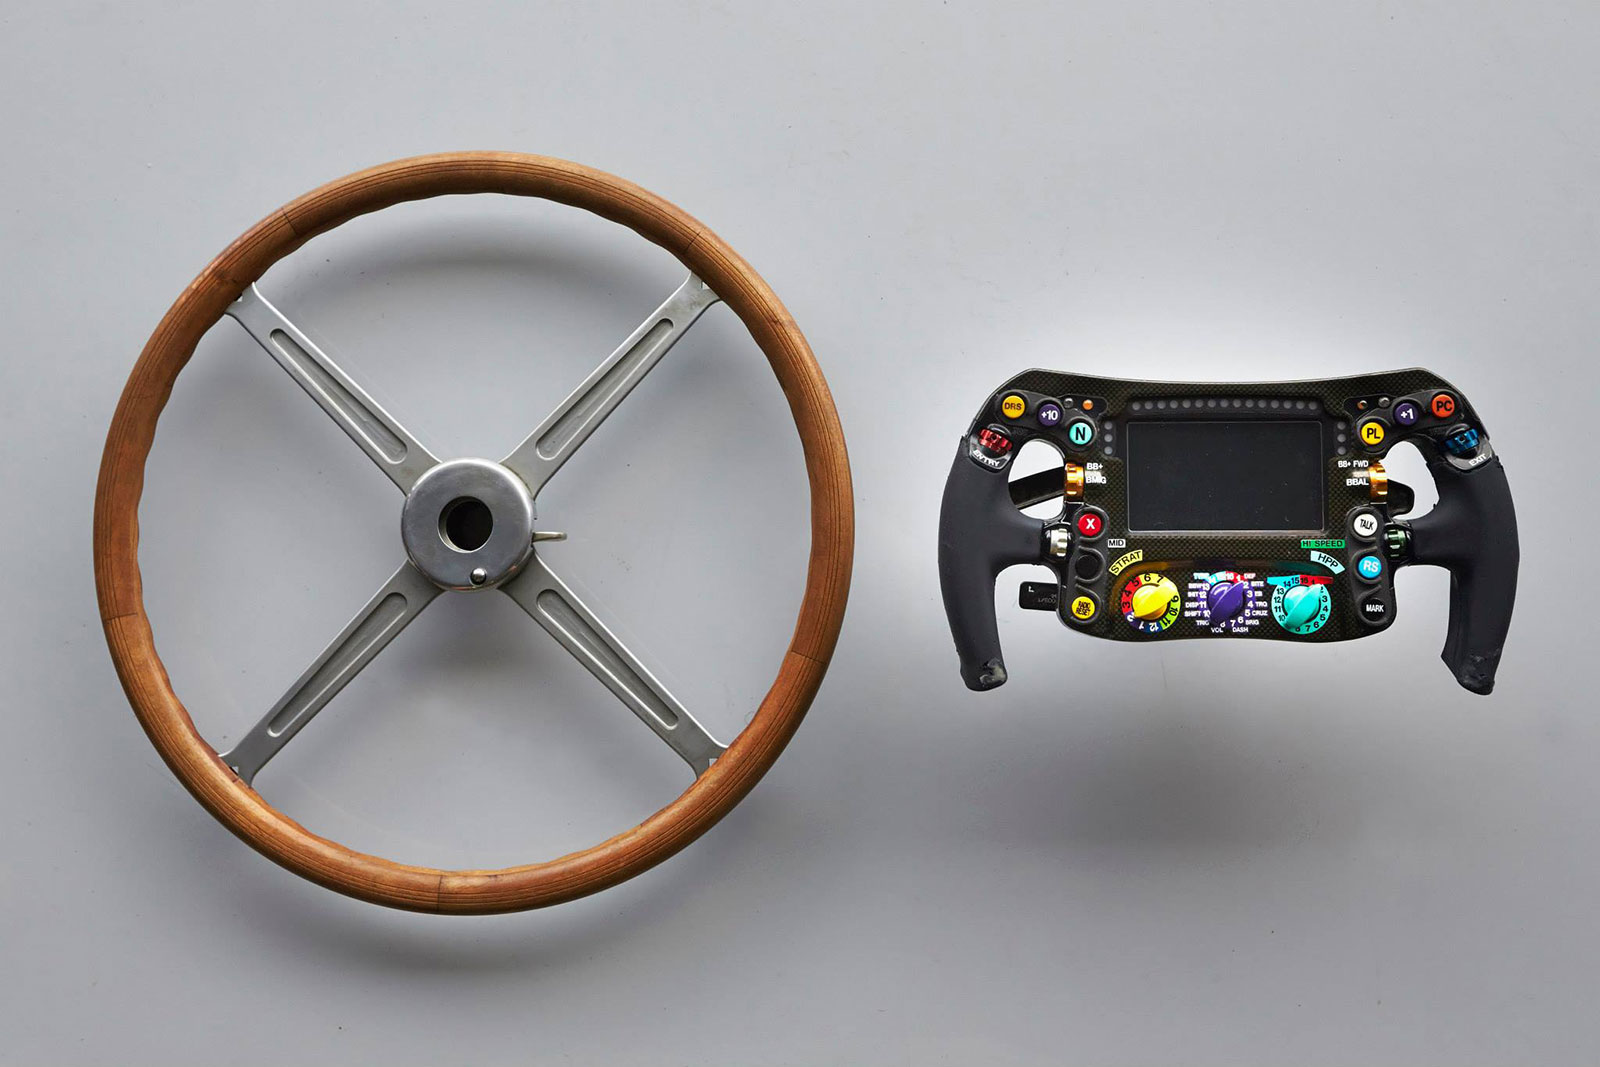  Mercedes F1 steering wheels from 1954 and present.